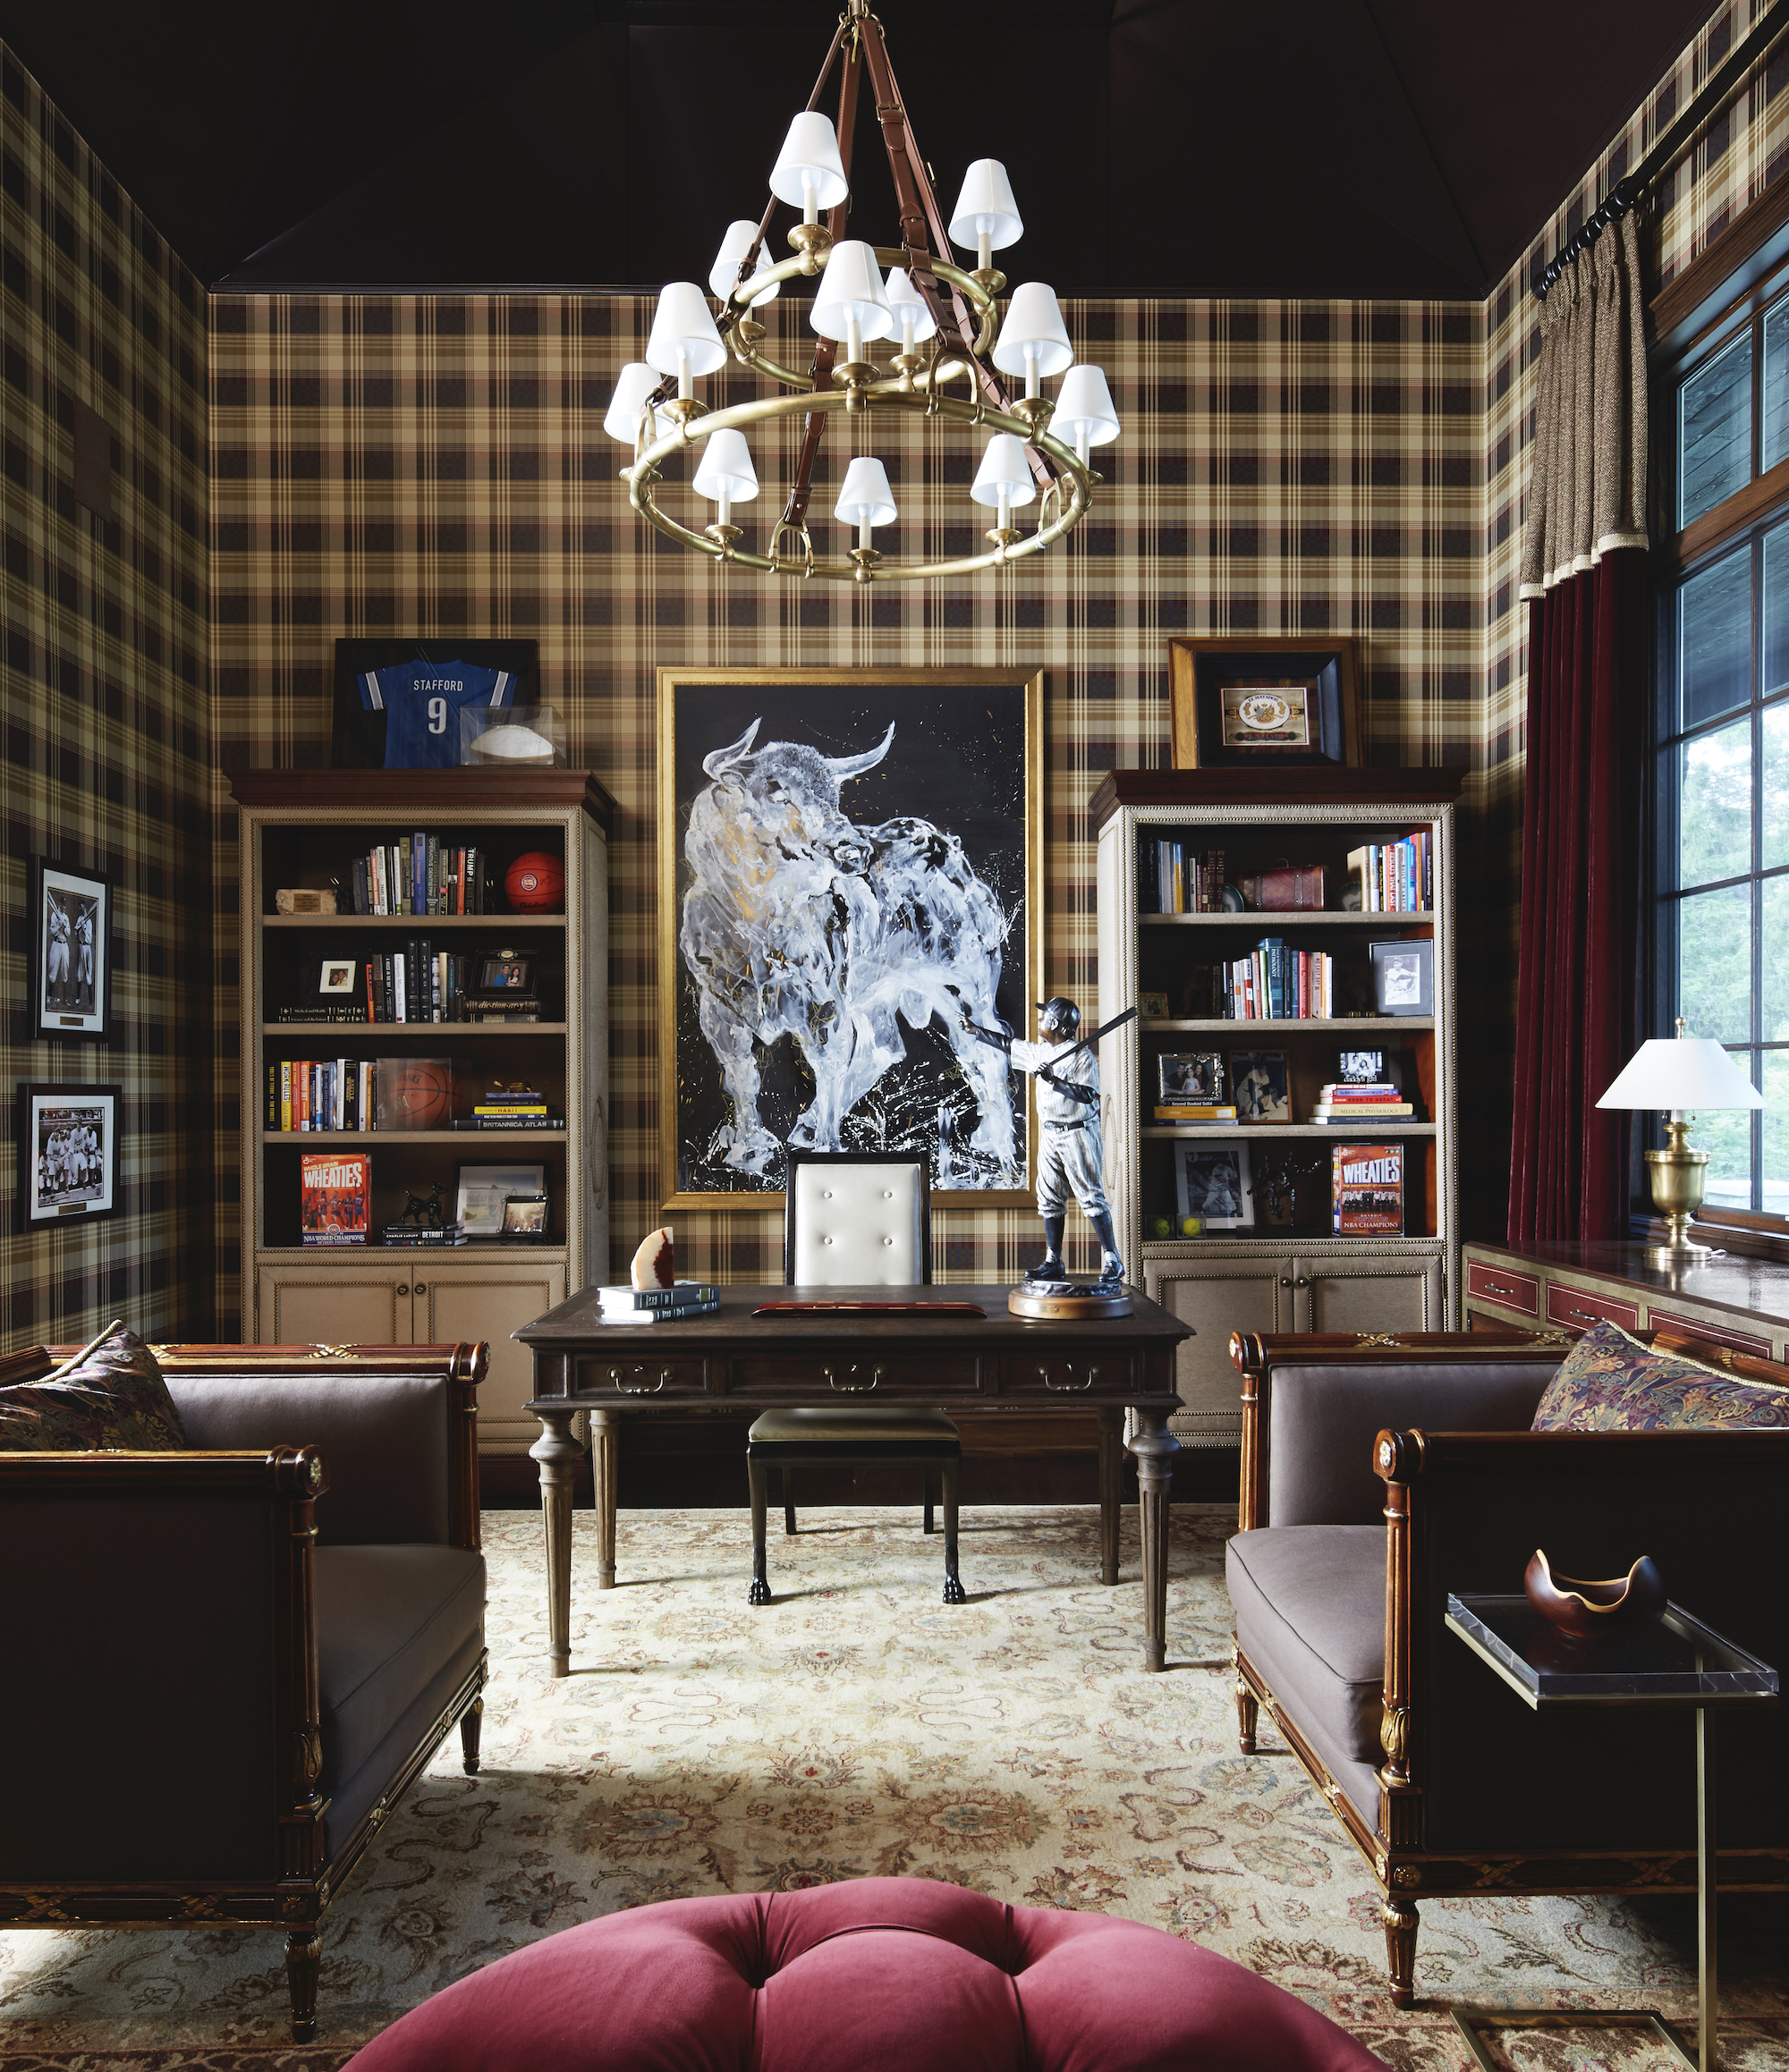 A study or home office interior designed by Corey Damon Jenkins